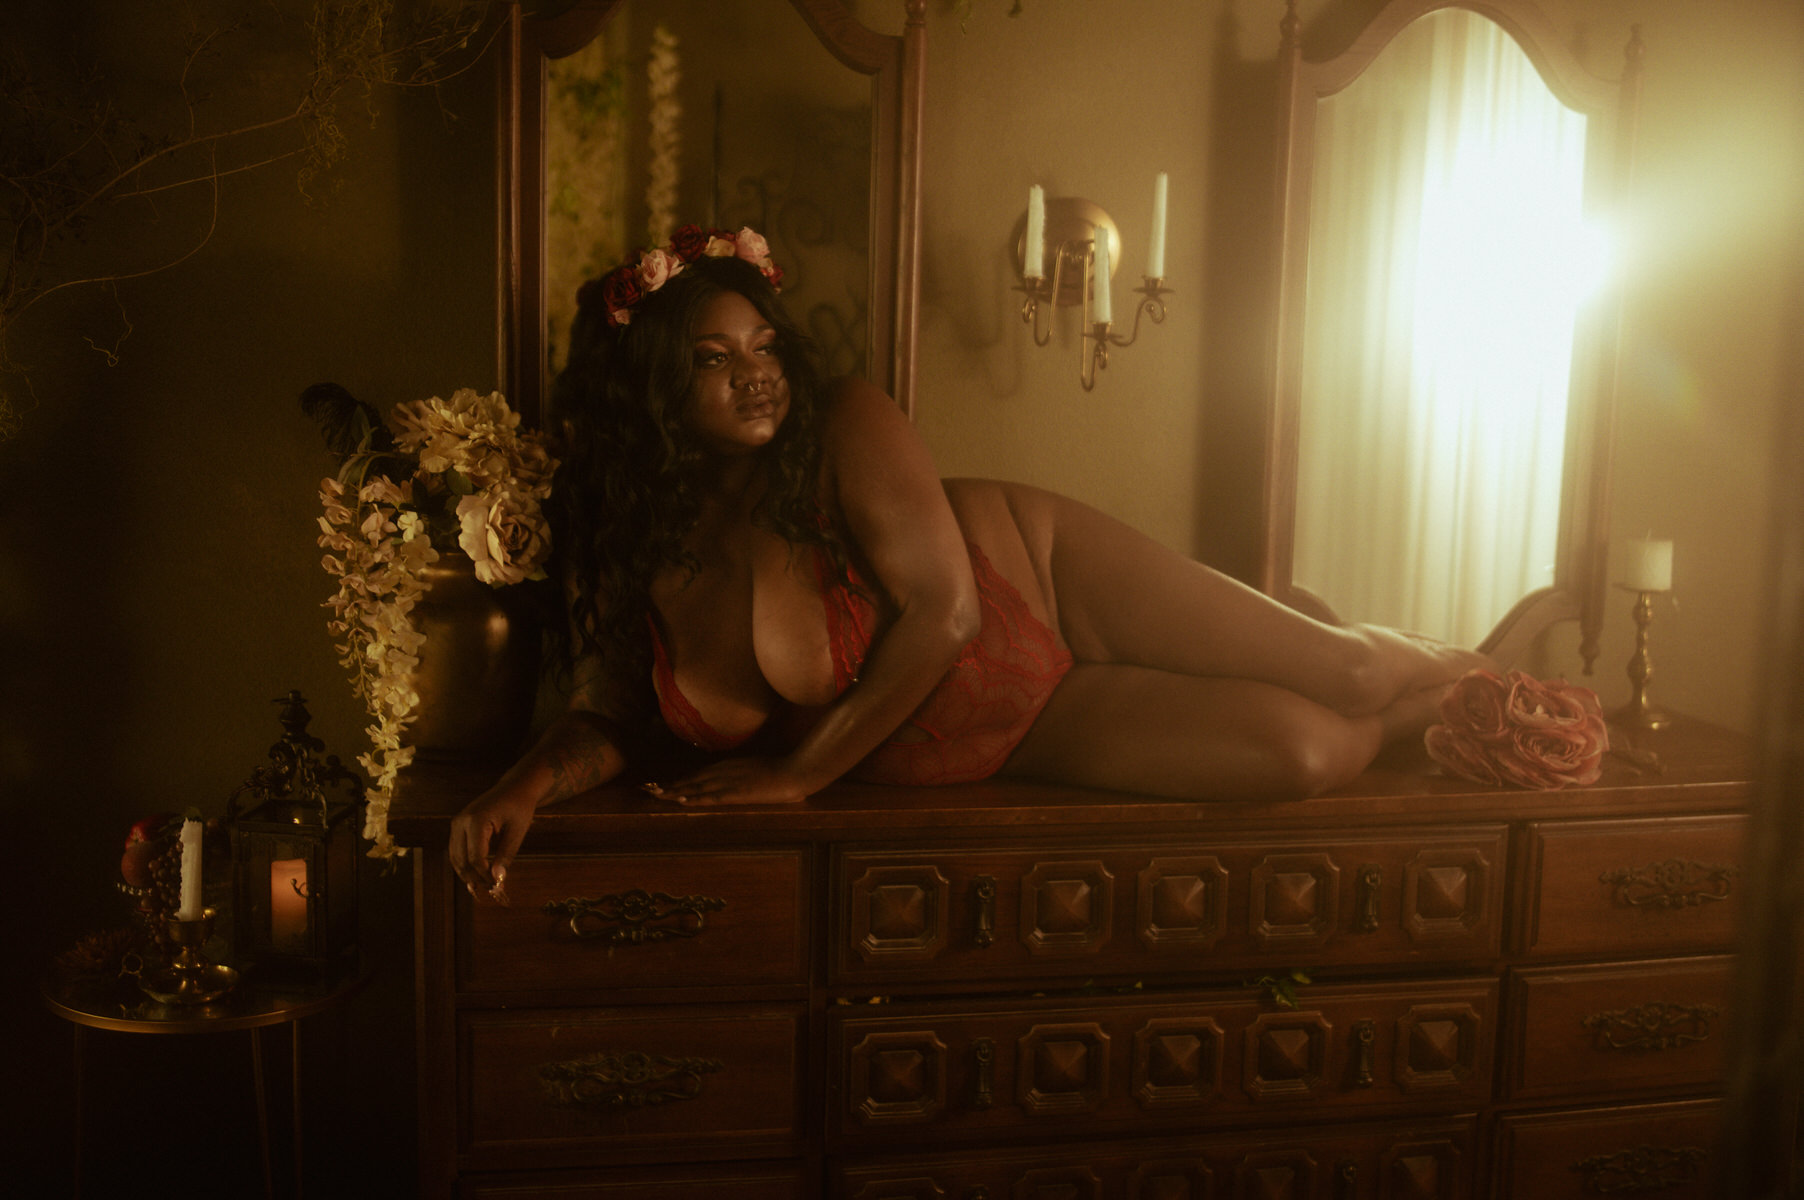 A woman in lingerie laying on a dresser in front of a mirror.